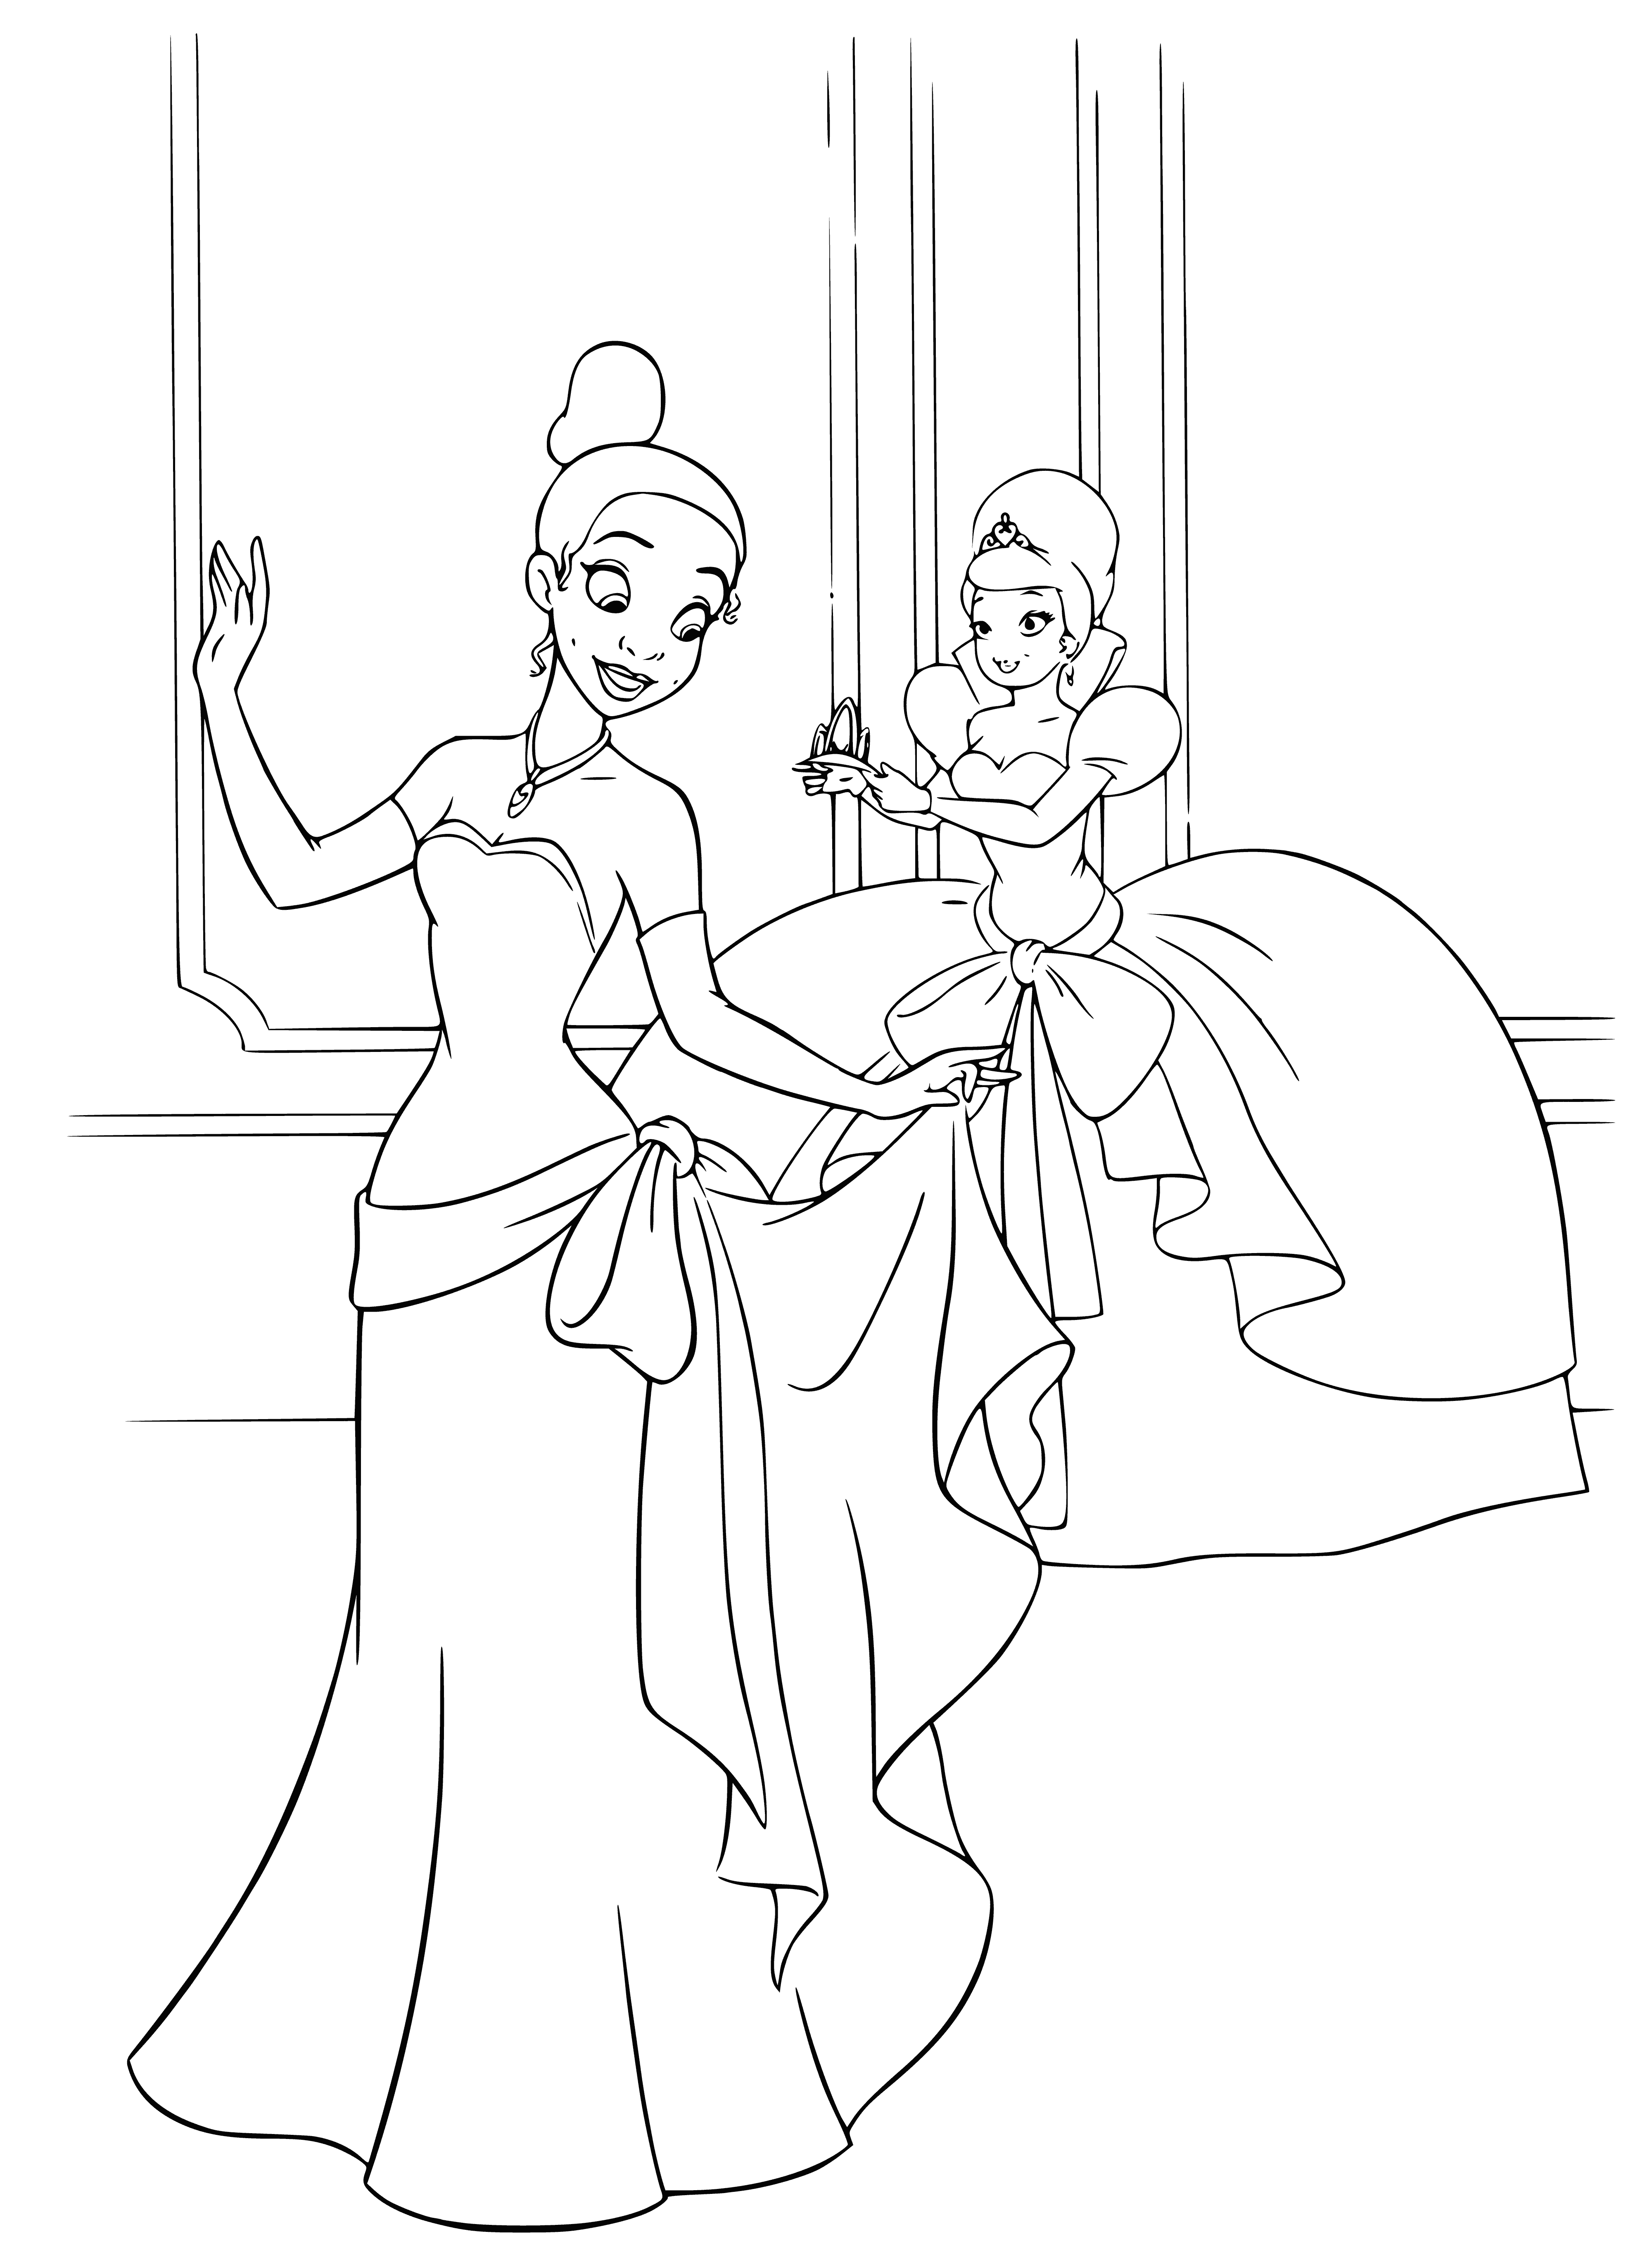 Tiana and Charlotte coloring page